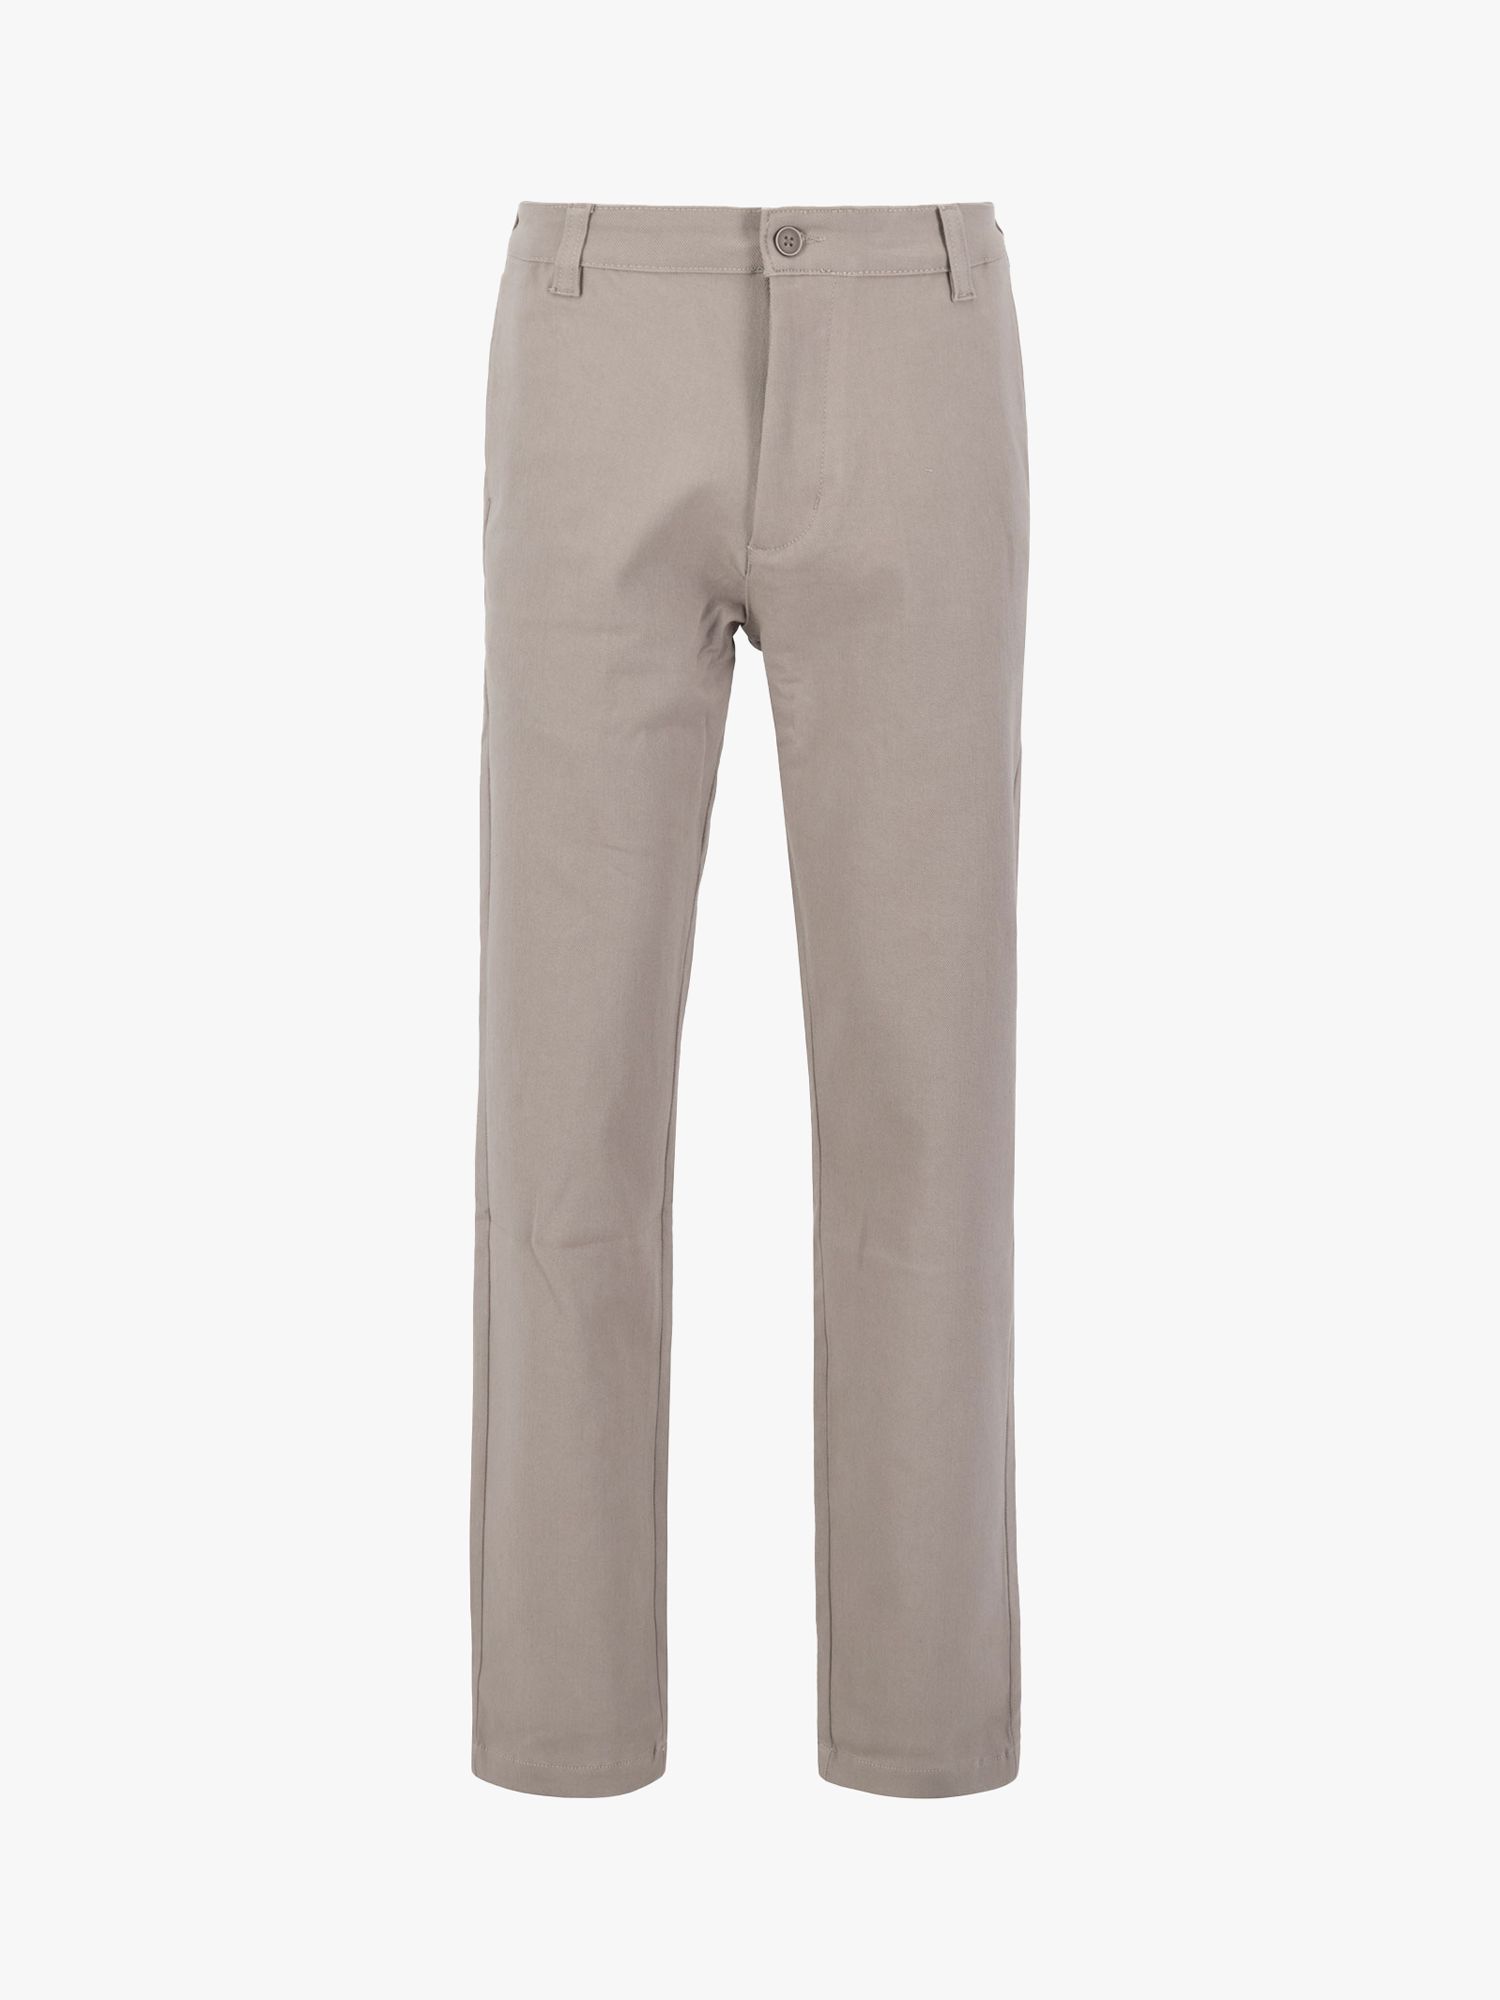 Buy Alpha Industries Chino Cotton Blend Trousers Online at johnlewis.com